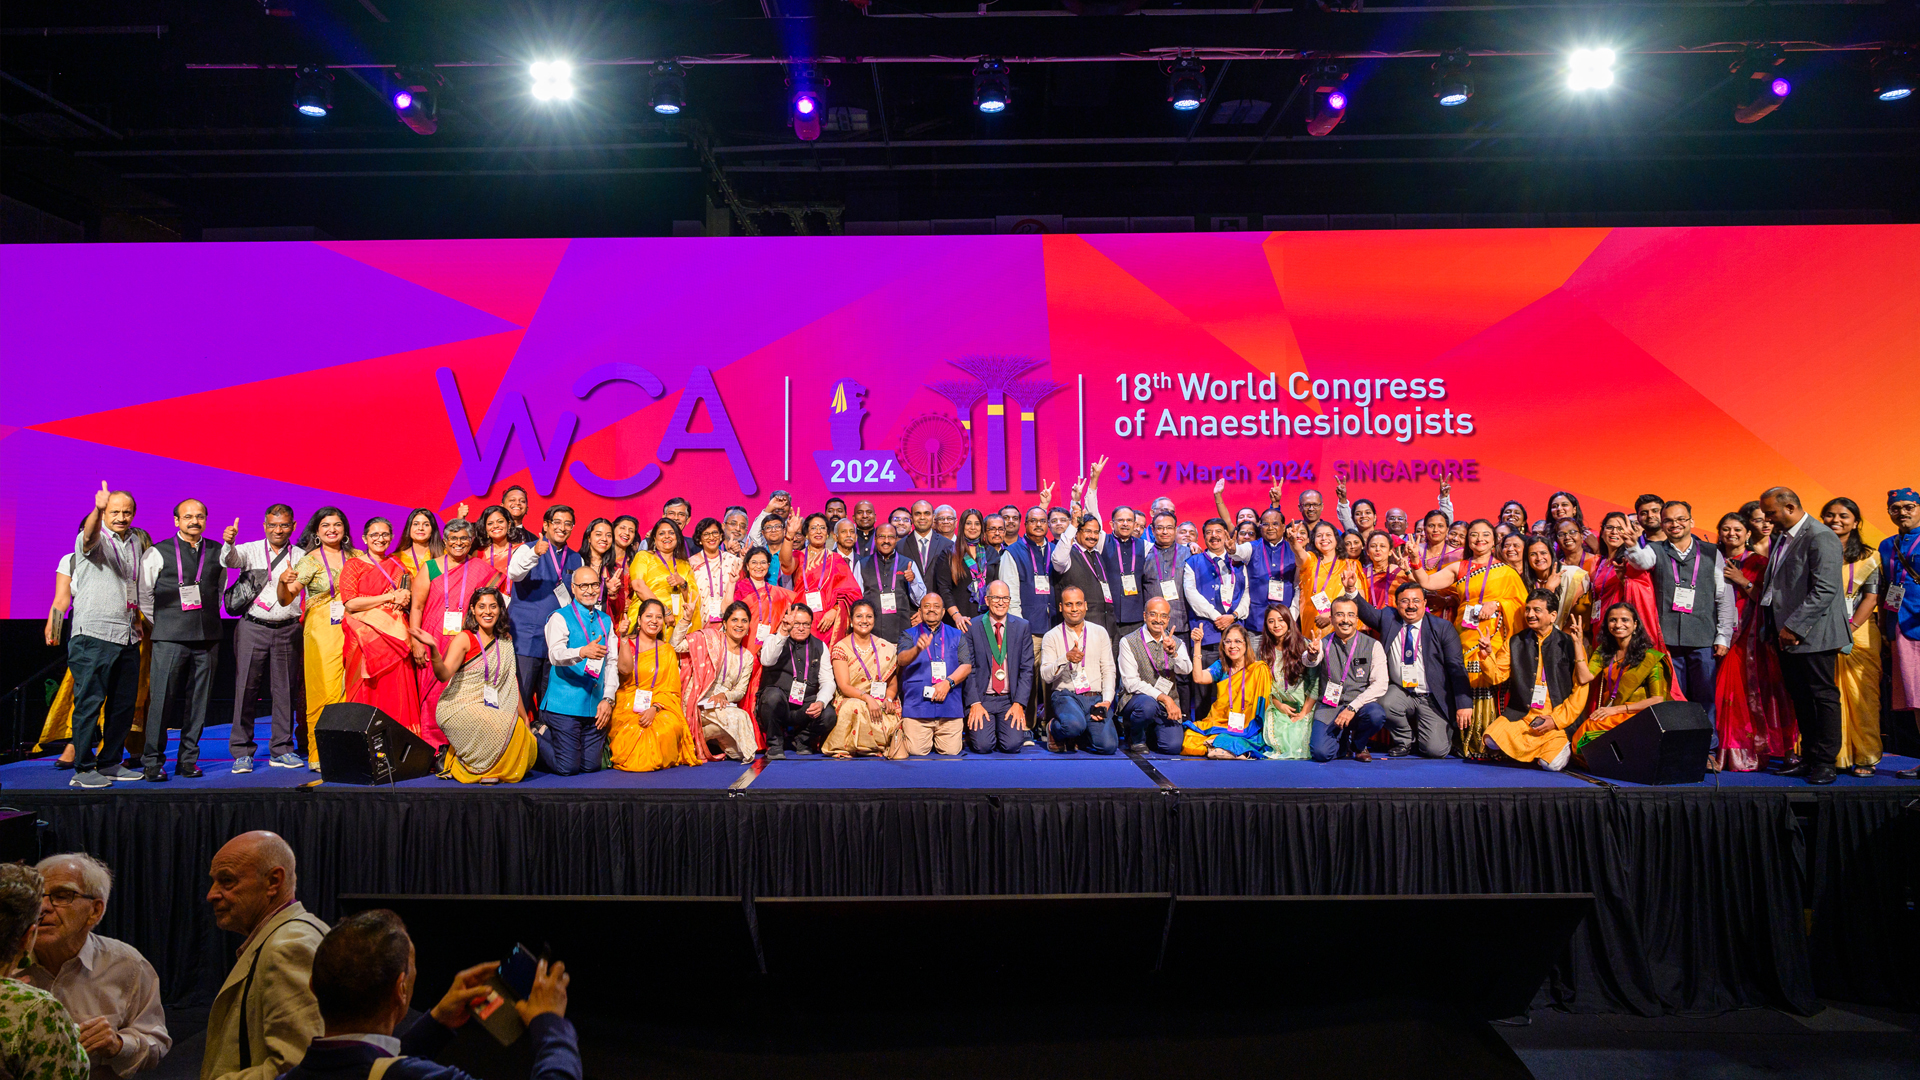 Highlights from the 18th World Congress of AnaesthesiologistsMain Image